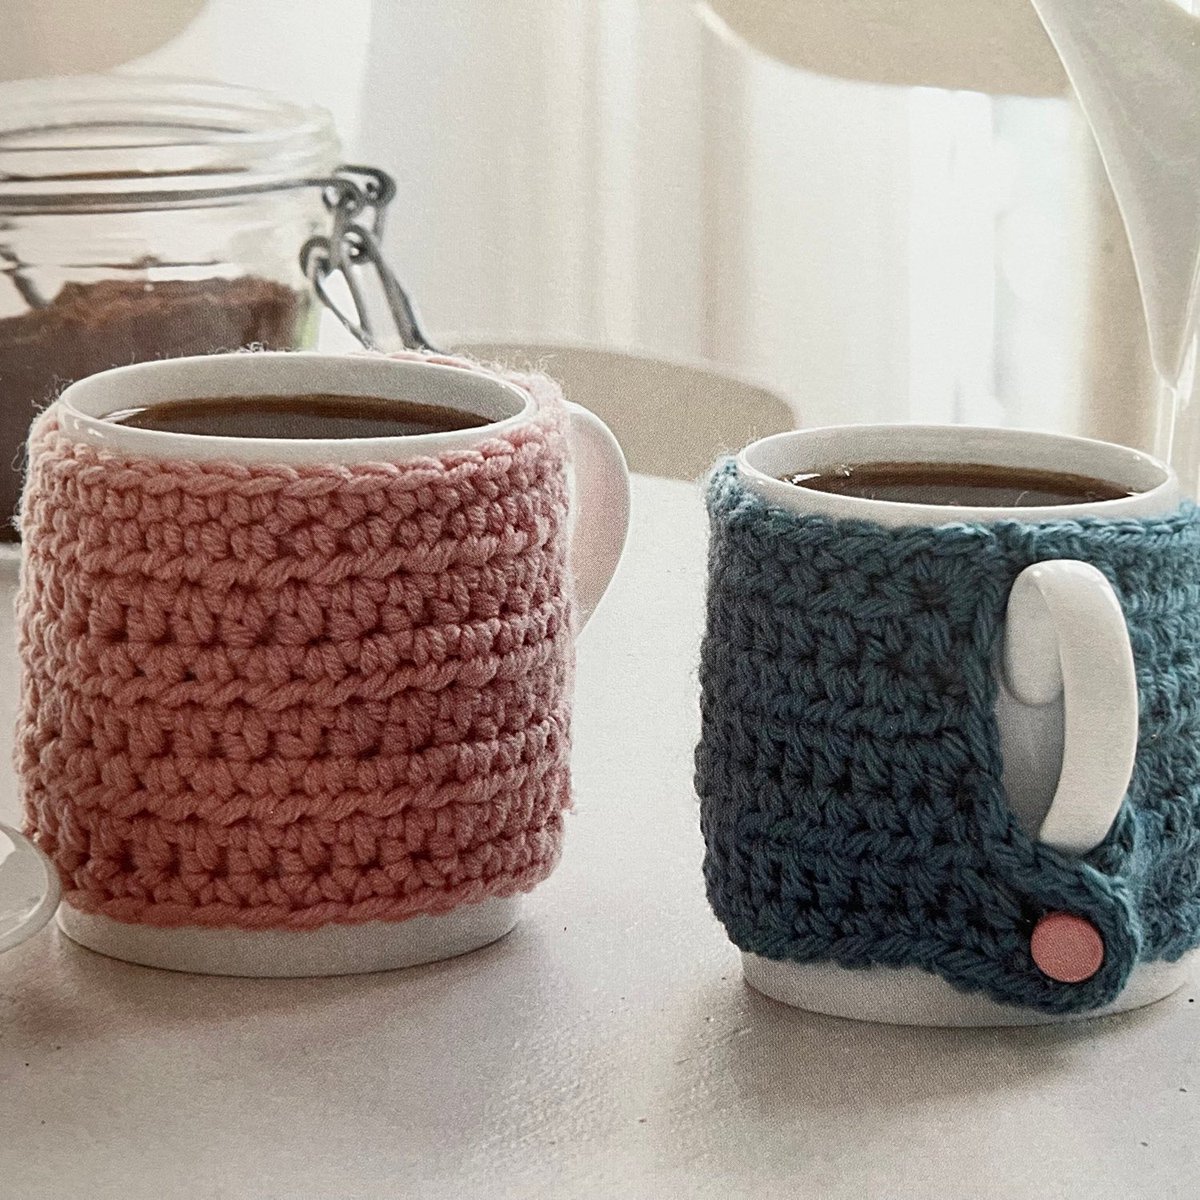 Excited to share this item from my #etsy shop: Crochet Cup Cosy Crochet Pattern #cup #coffee #tea #quickmakes #earlybiz #etsyfinds #MHHSBD #shopindie #Saturdays #crochet #cupcosy #cupwamer #yarn #mug #gift #craft etsy.me/3wyTqWW